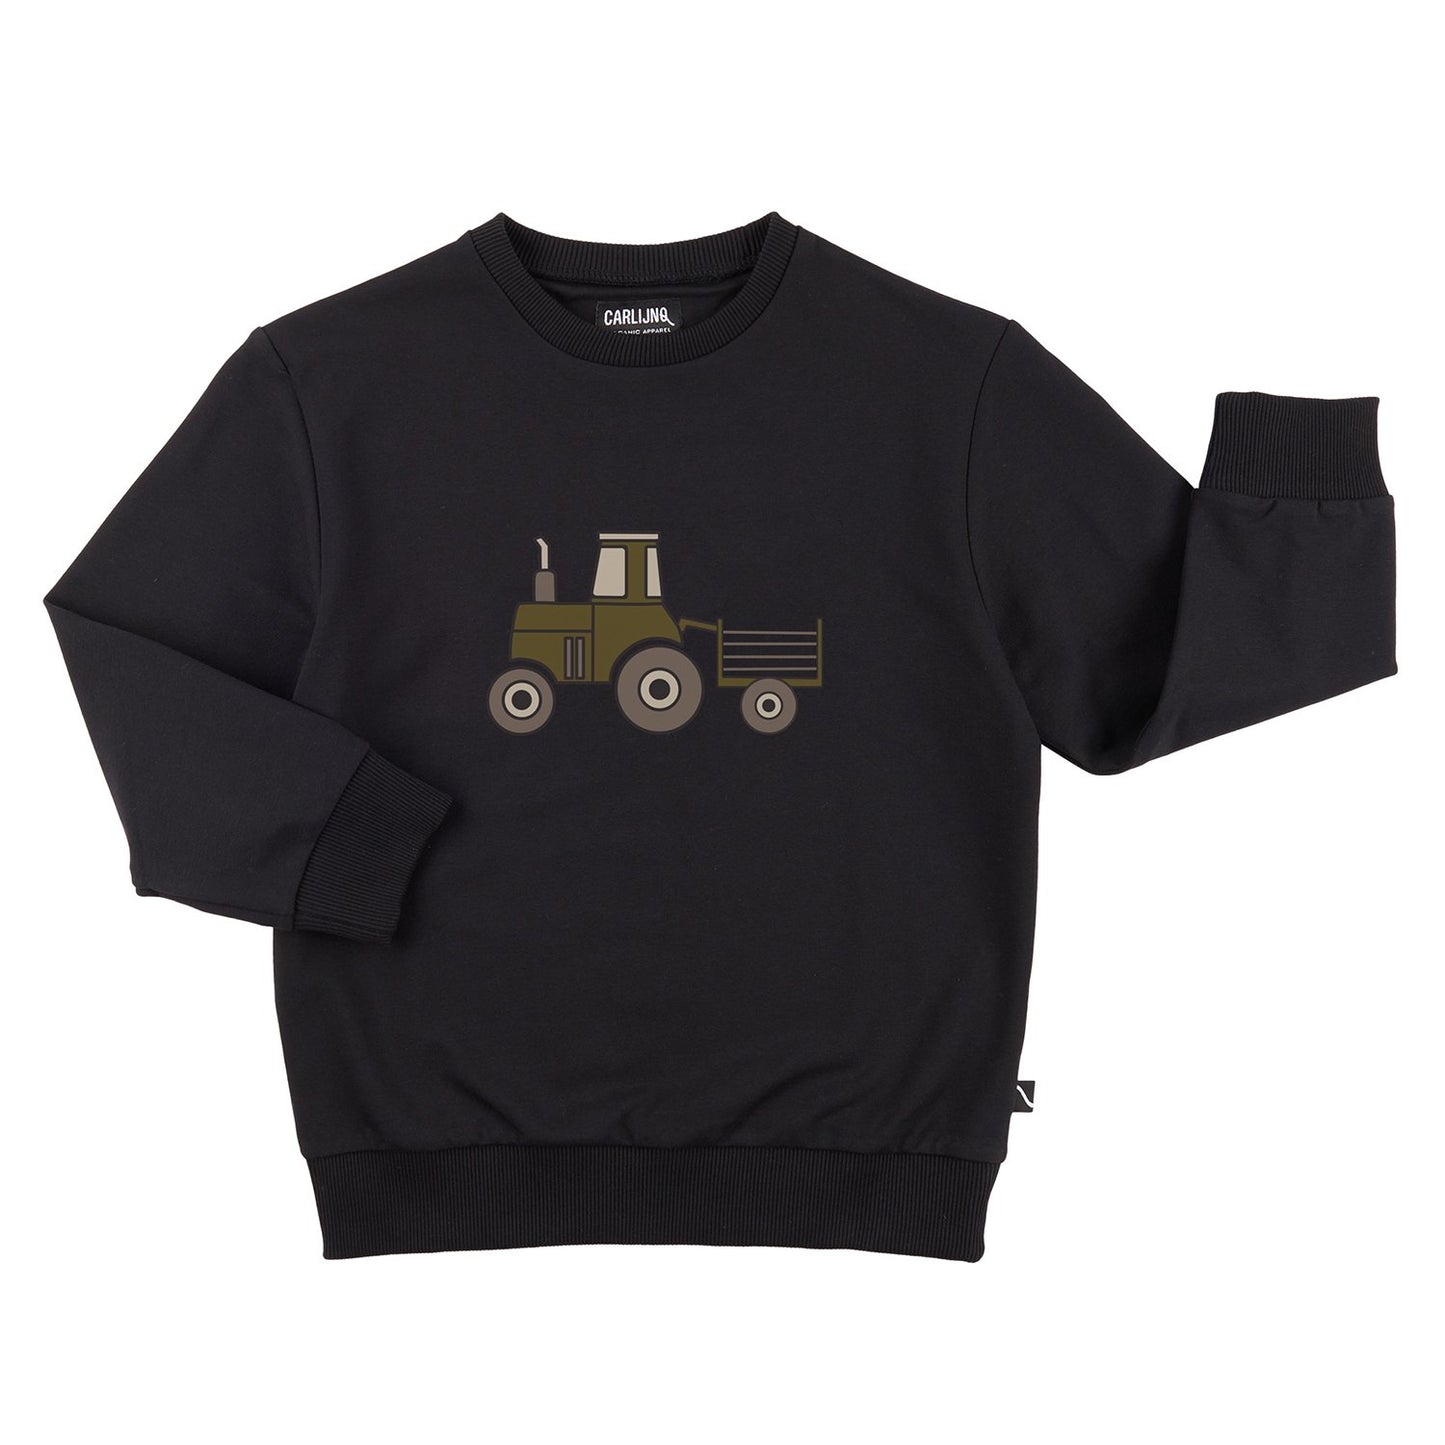 Tractor - sweater